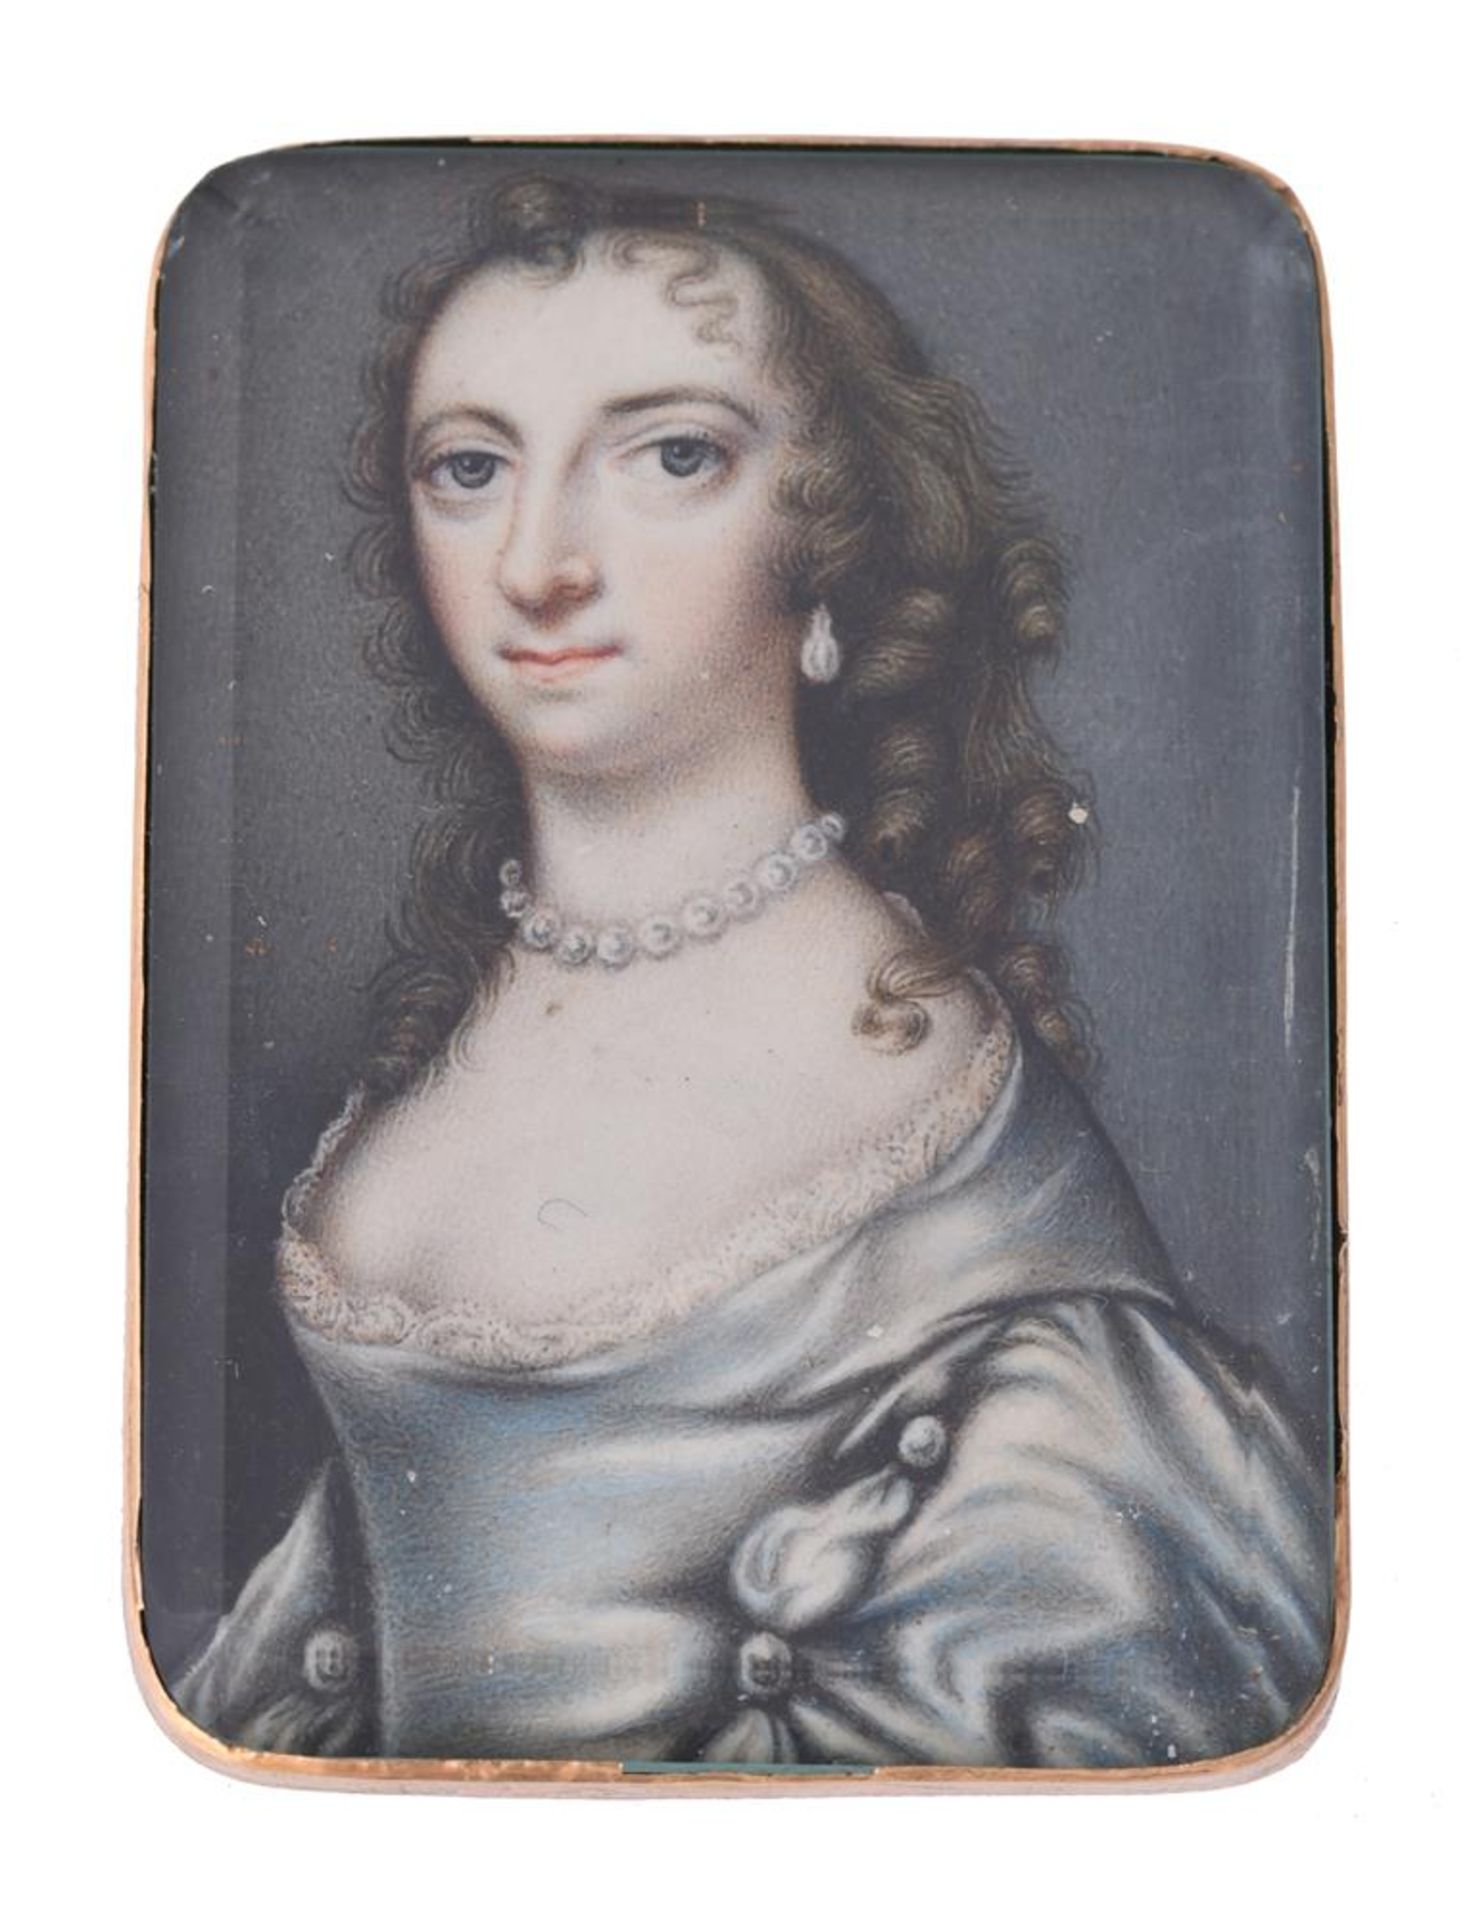 Dutch School (late 17th /early 18th century), A lady, wearing a dress and pearl necklace